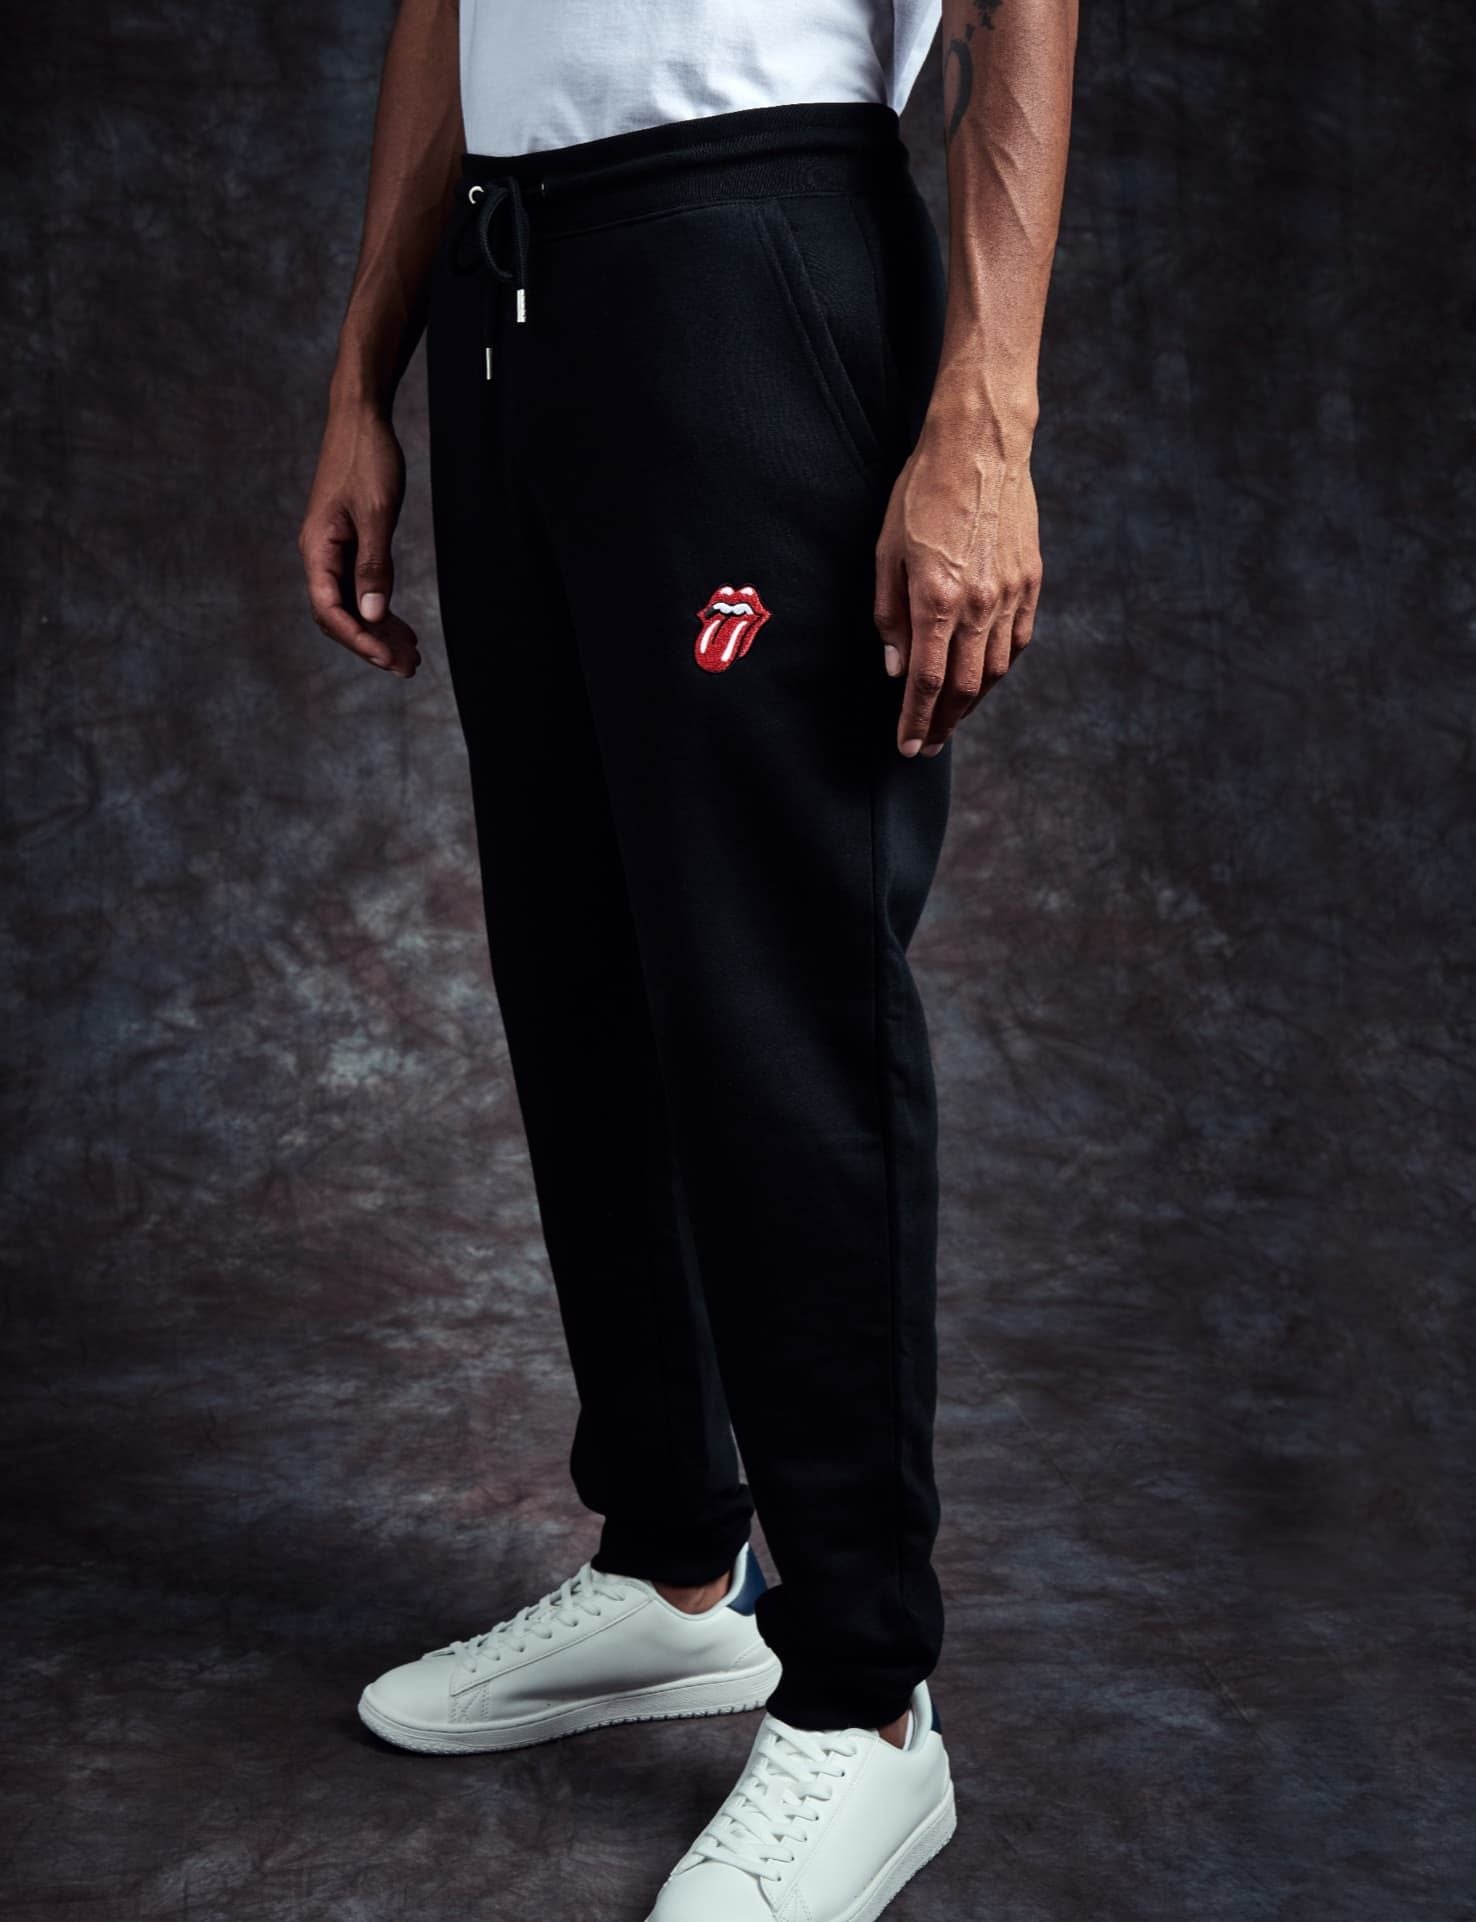 RS No. 9 Carnaby - Classic Tongue Sweatpants